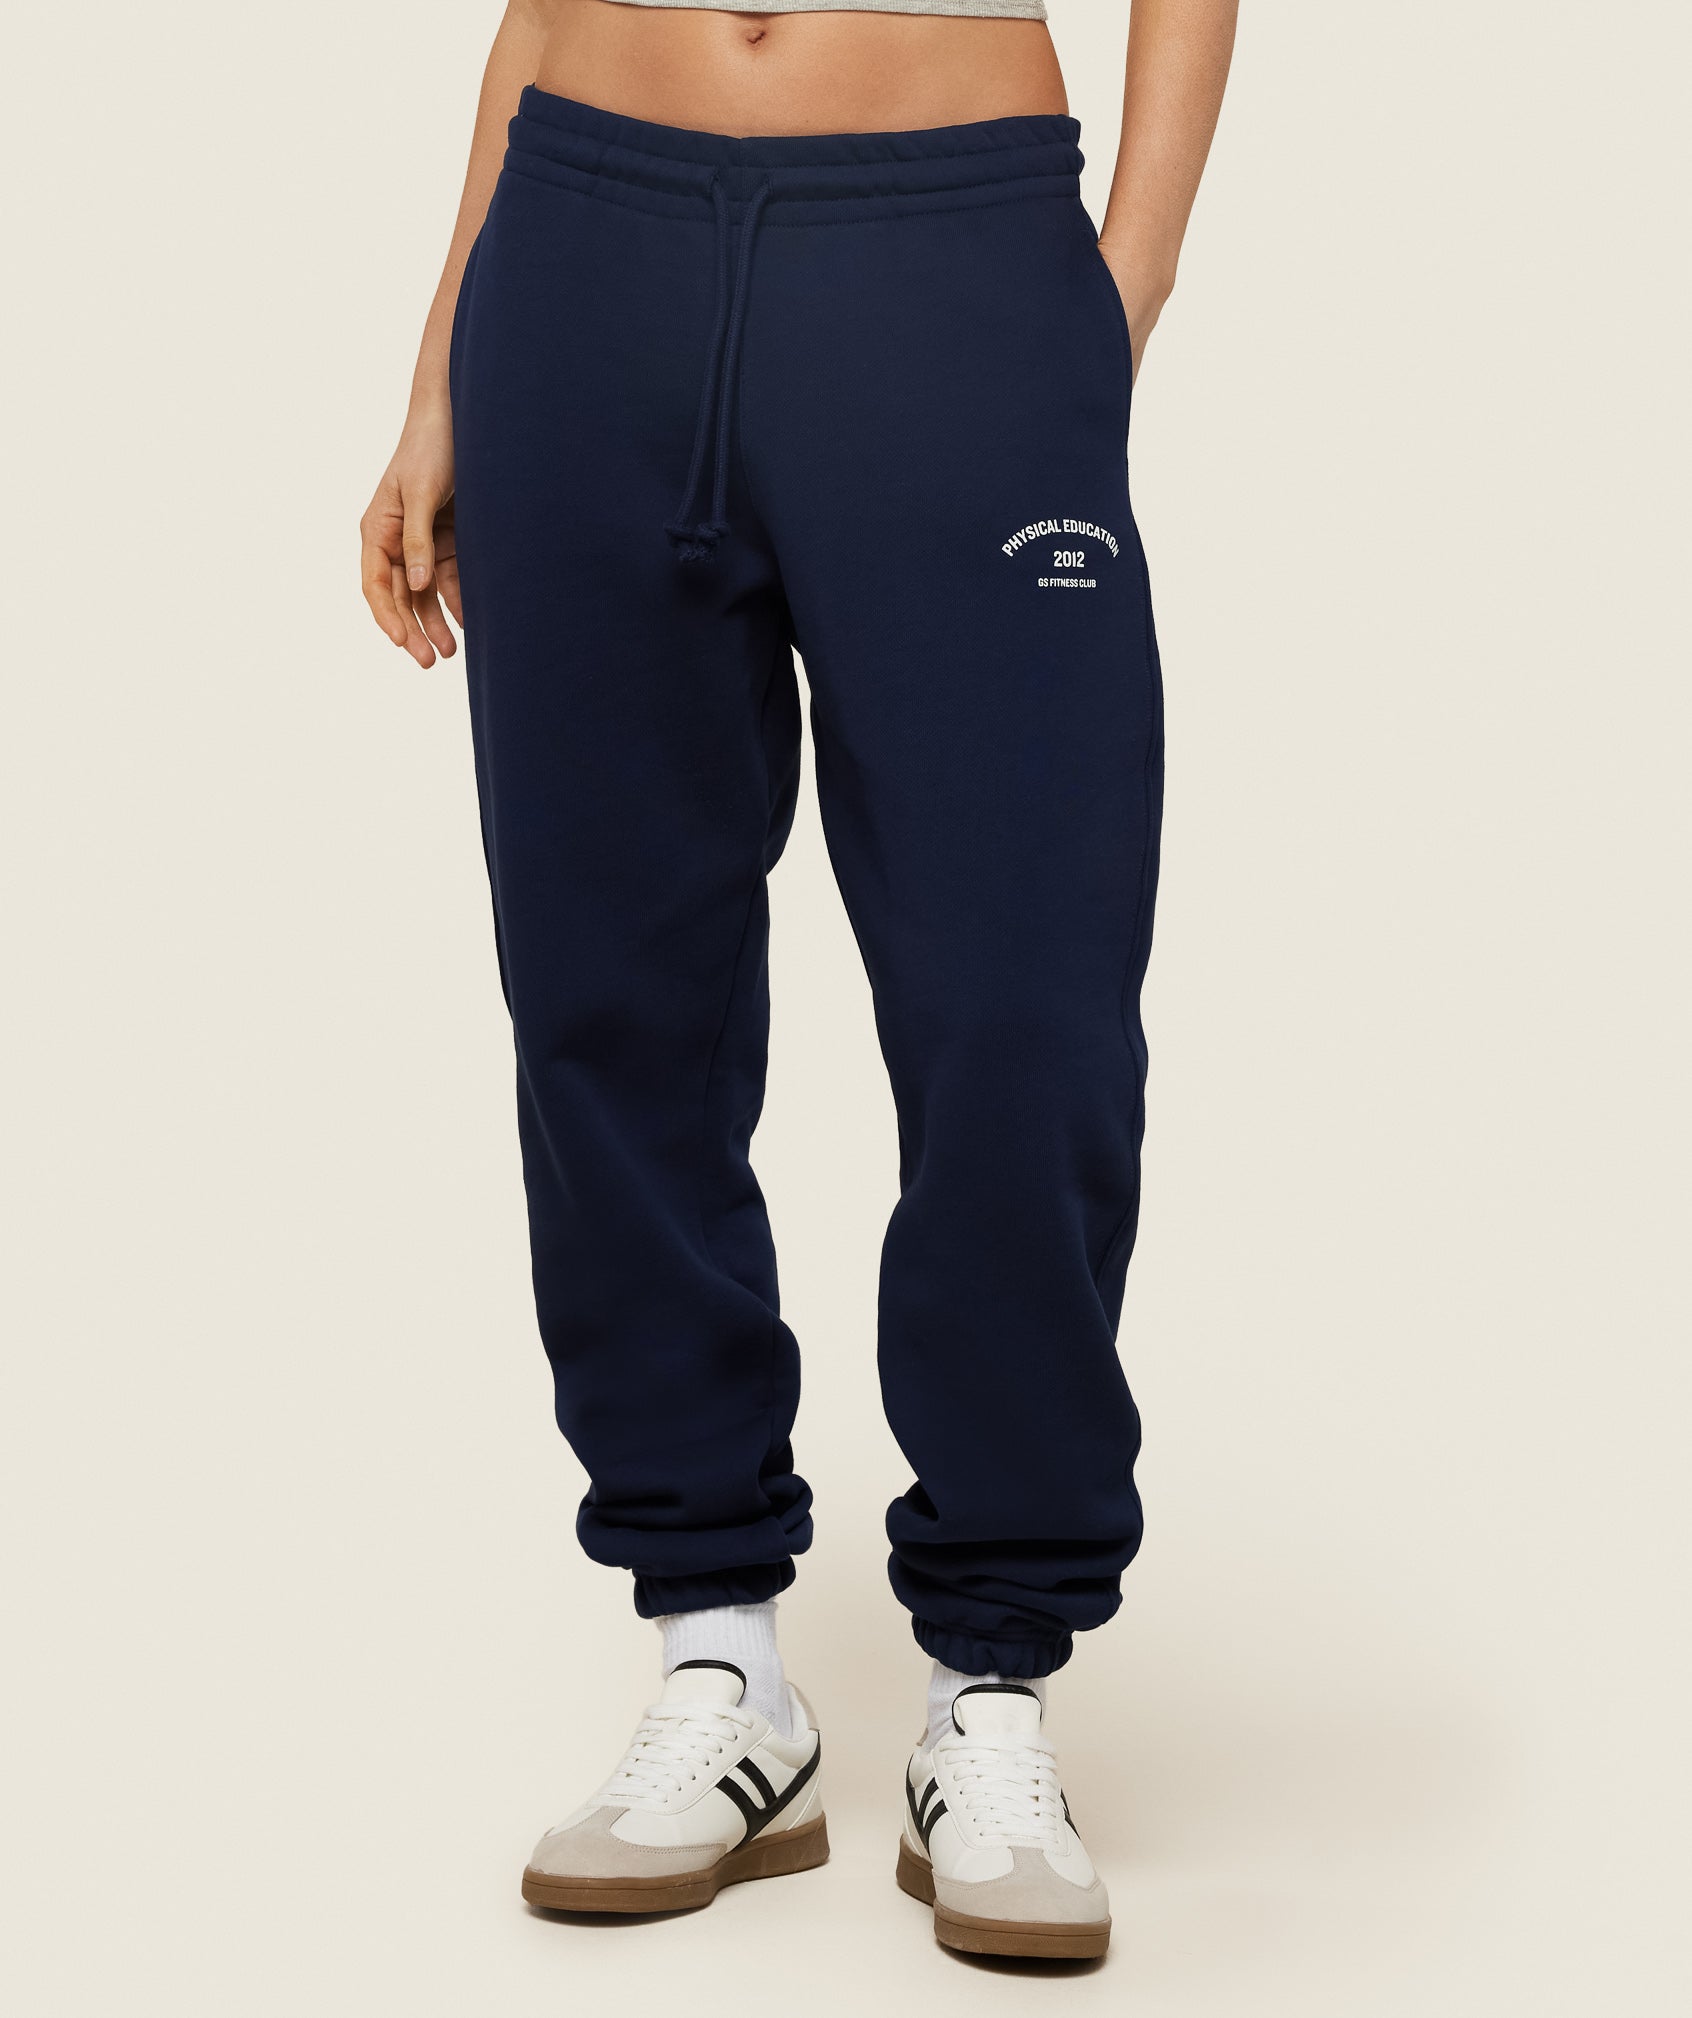 Phys Ed Graphic Sweatpants in Blue - view 1